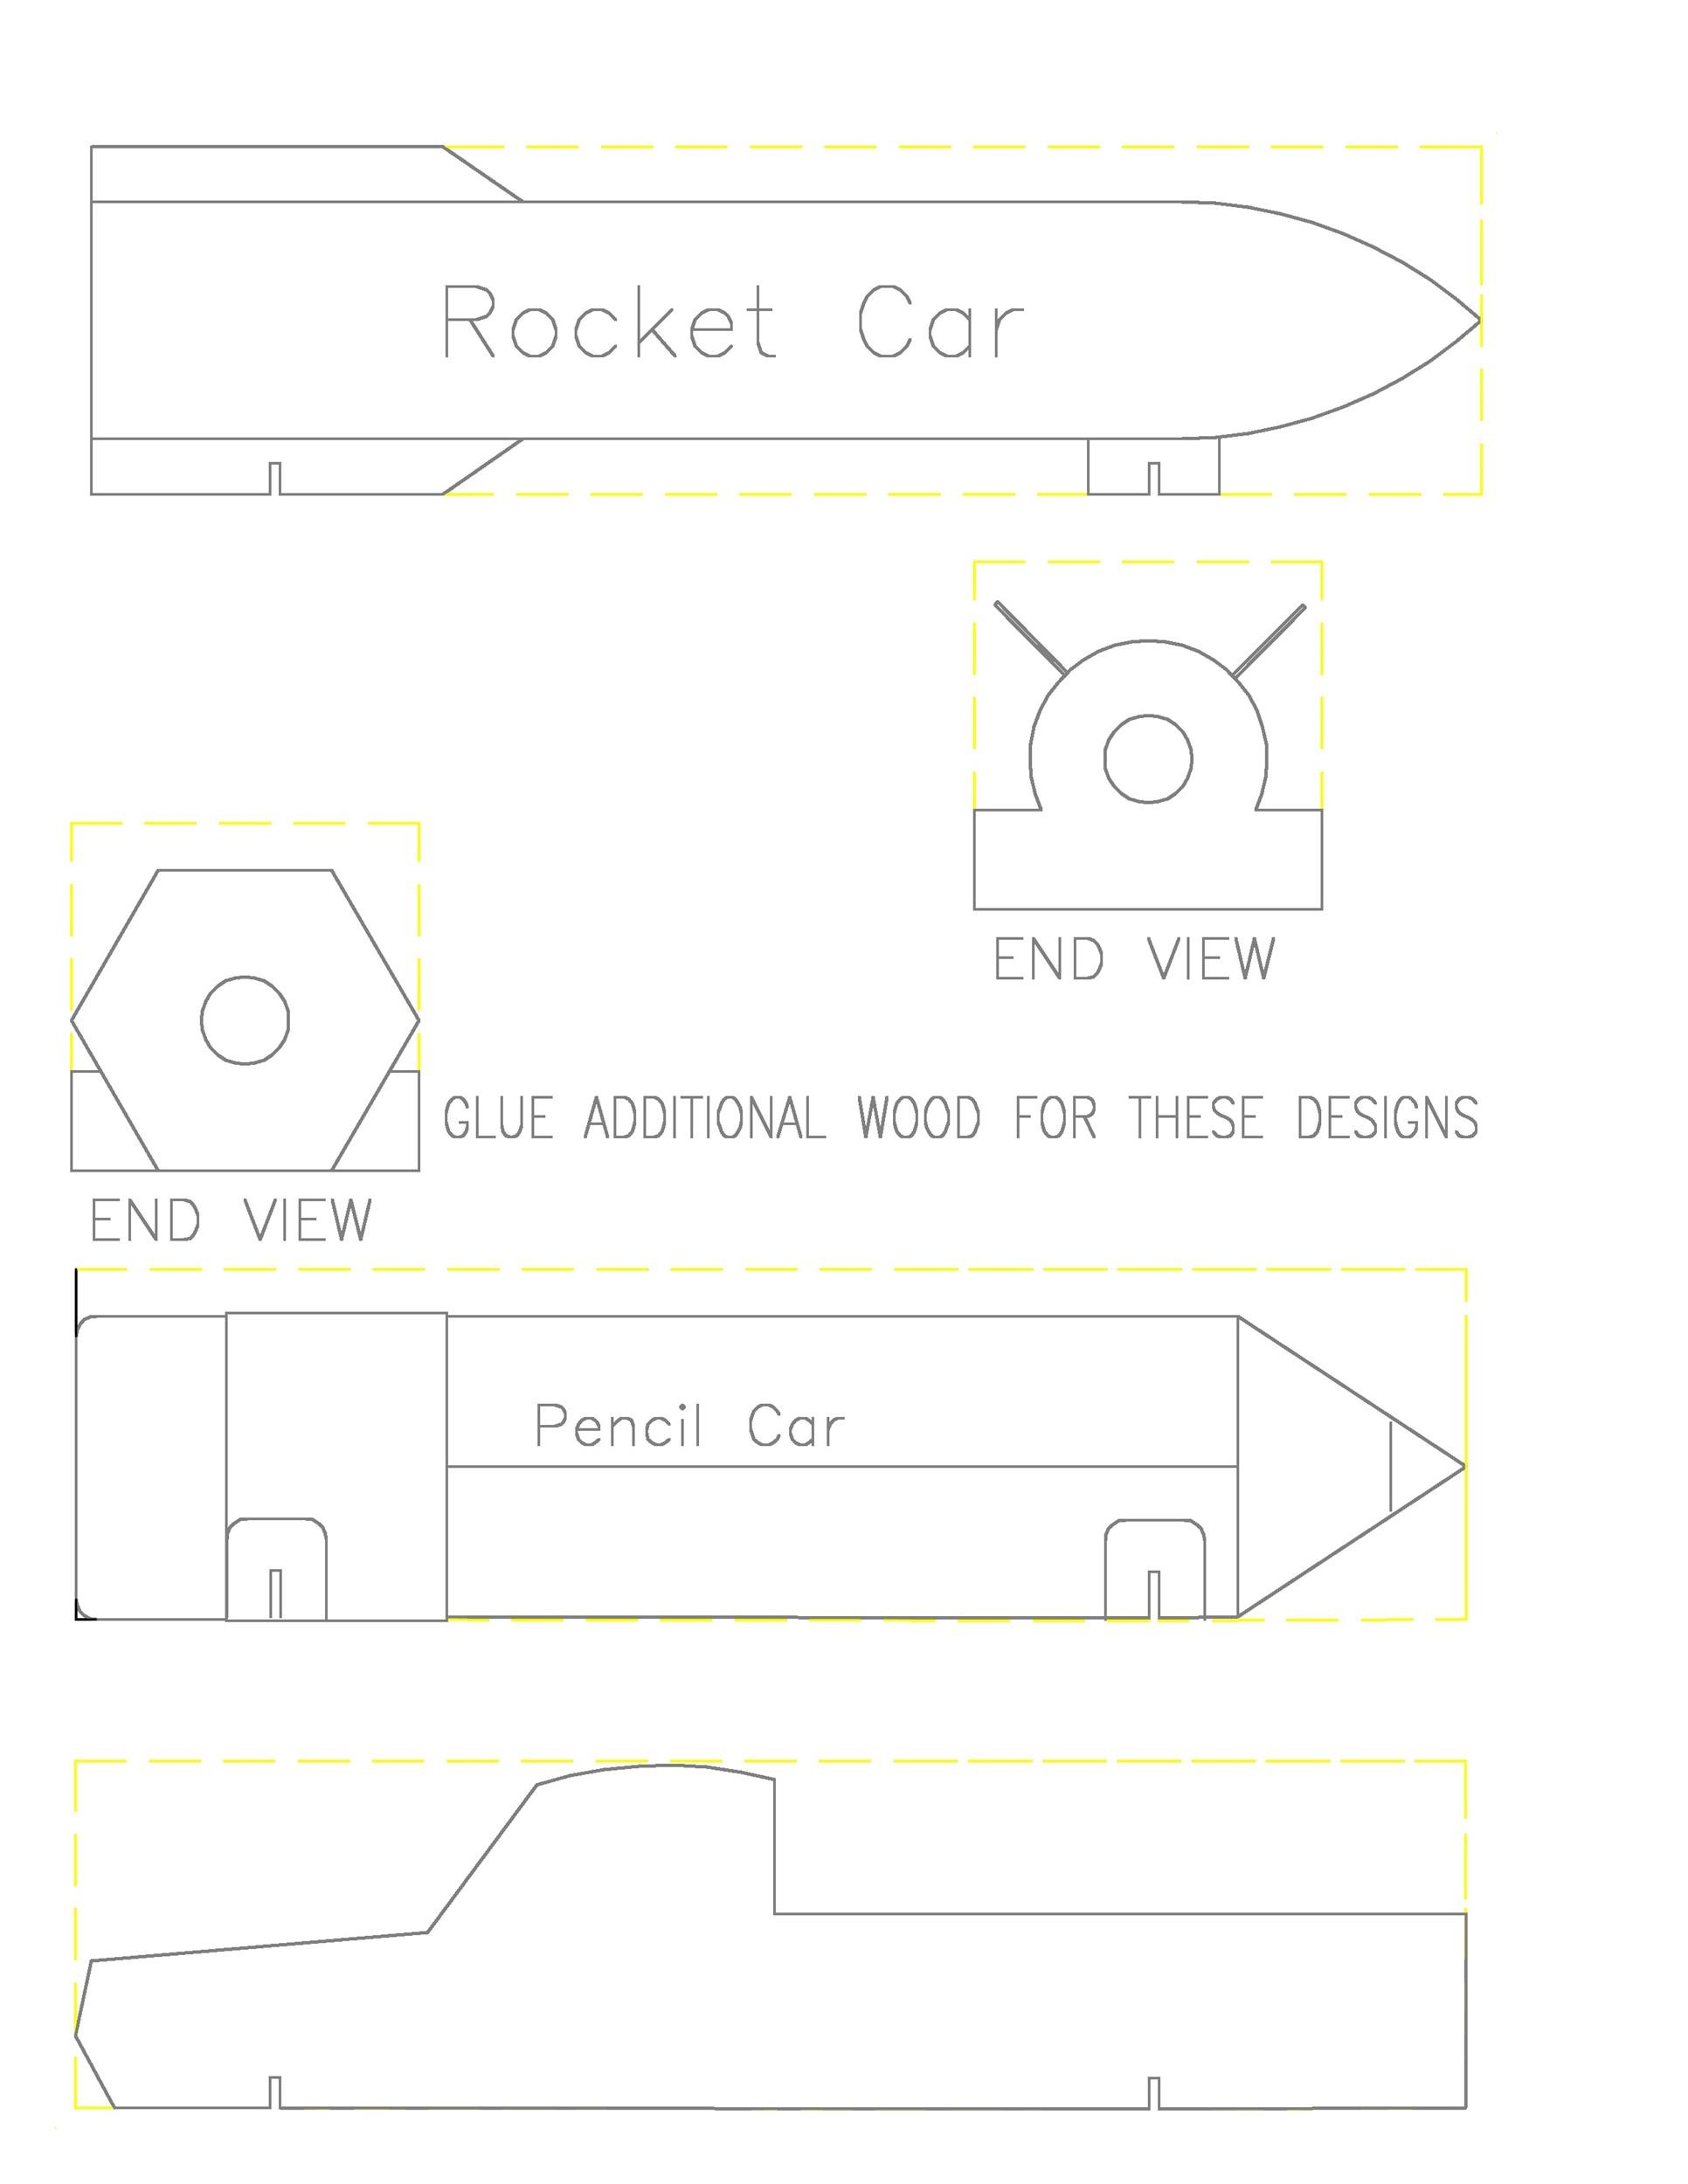 39 Awesome Pinewood Derby Car Designs & Templates ᐅ TemplateLab